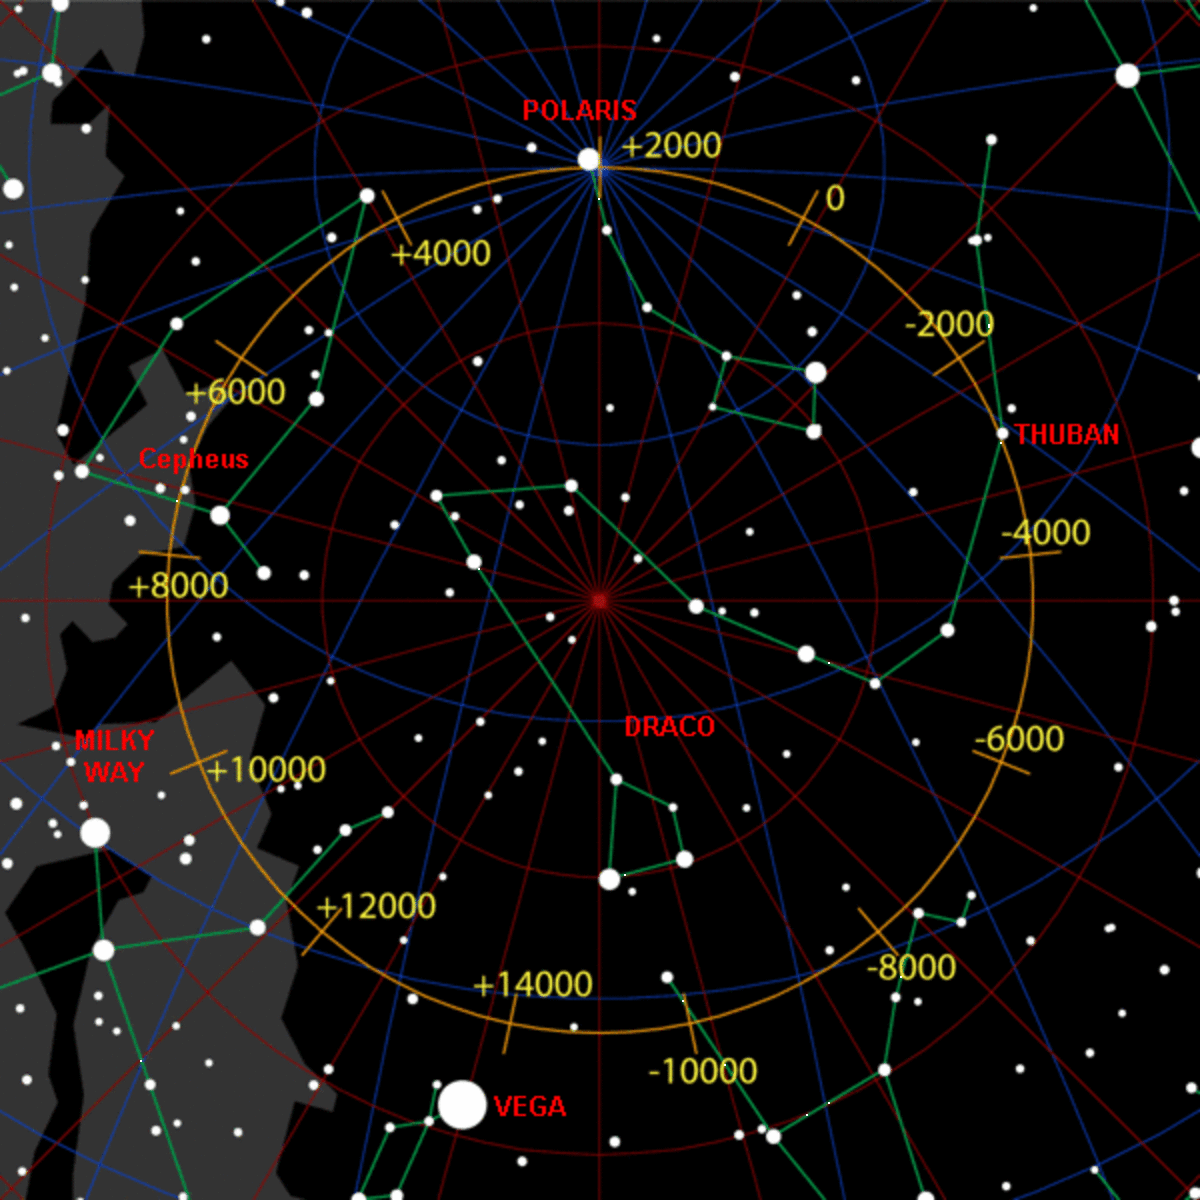 this is a north polar star map with dates showing where the north pole pointed and the dates past and future of pole stars. Depending on the reference, Polaris was aligned with the descending shaft either in 2004, 2034 and 2060.